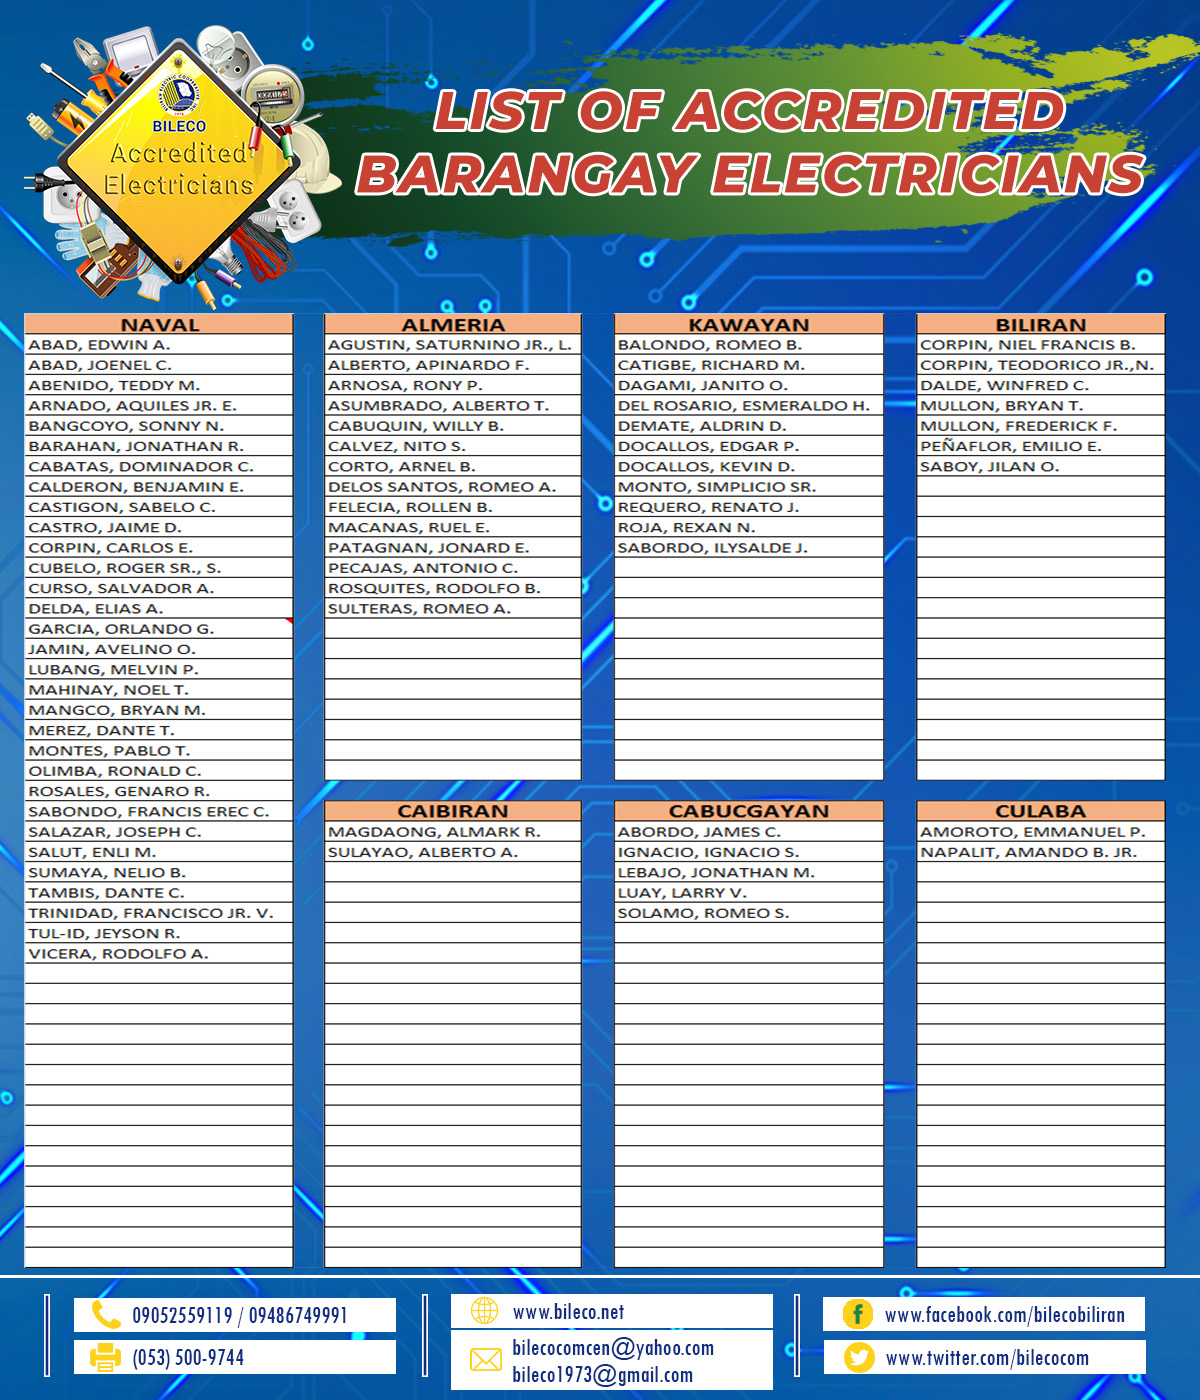 You are currently viewing List of accredited barangay electricians as of March 01, 2019